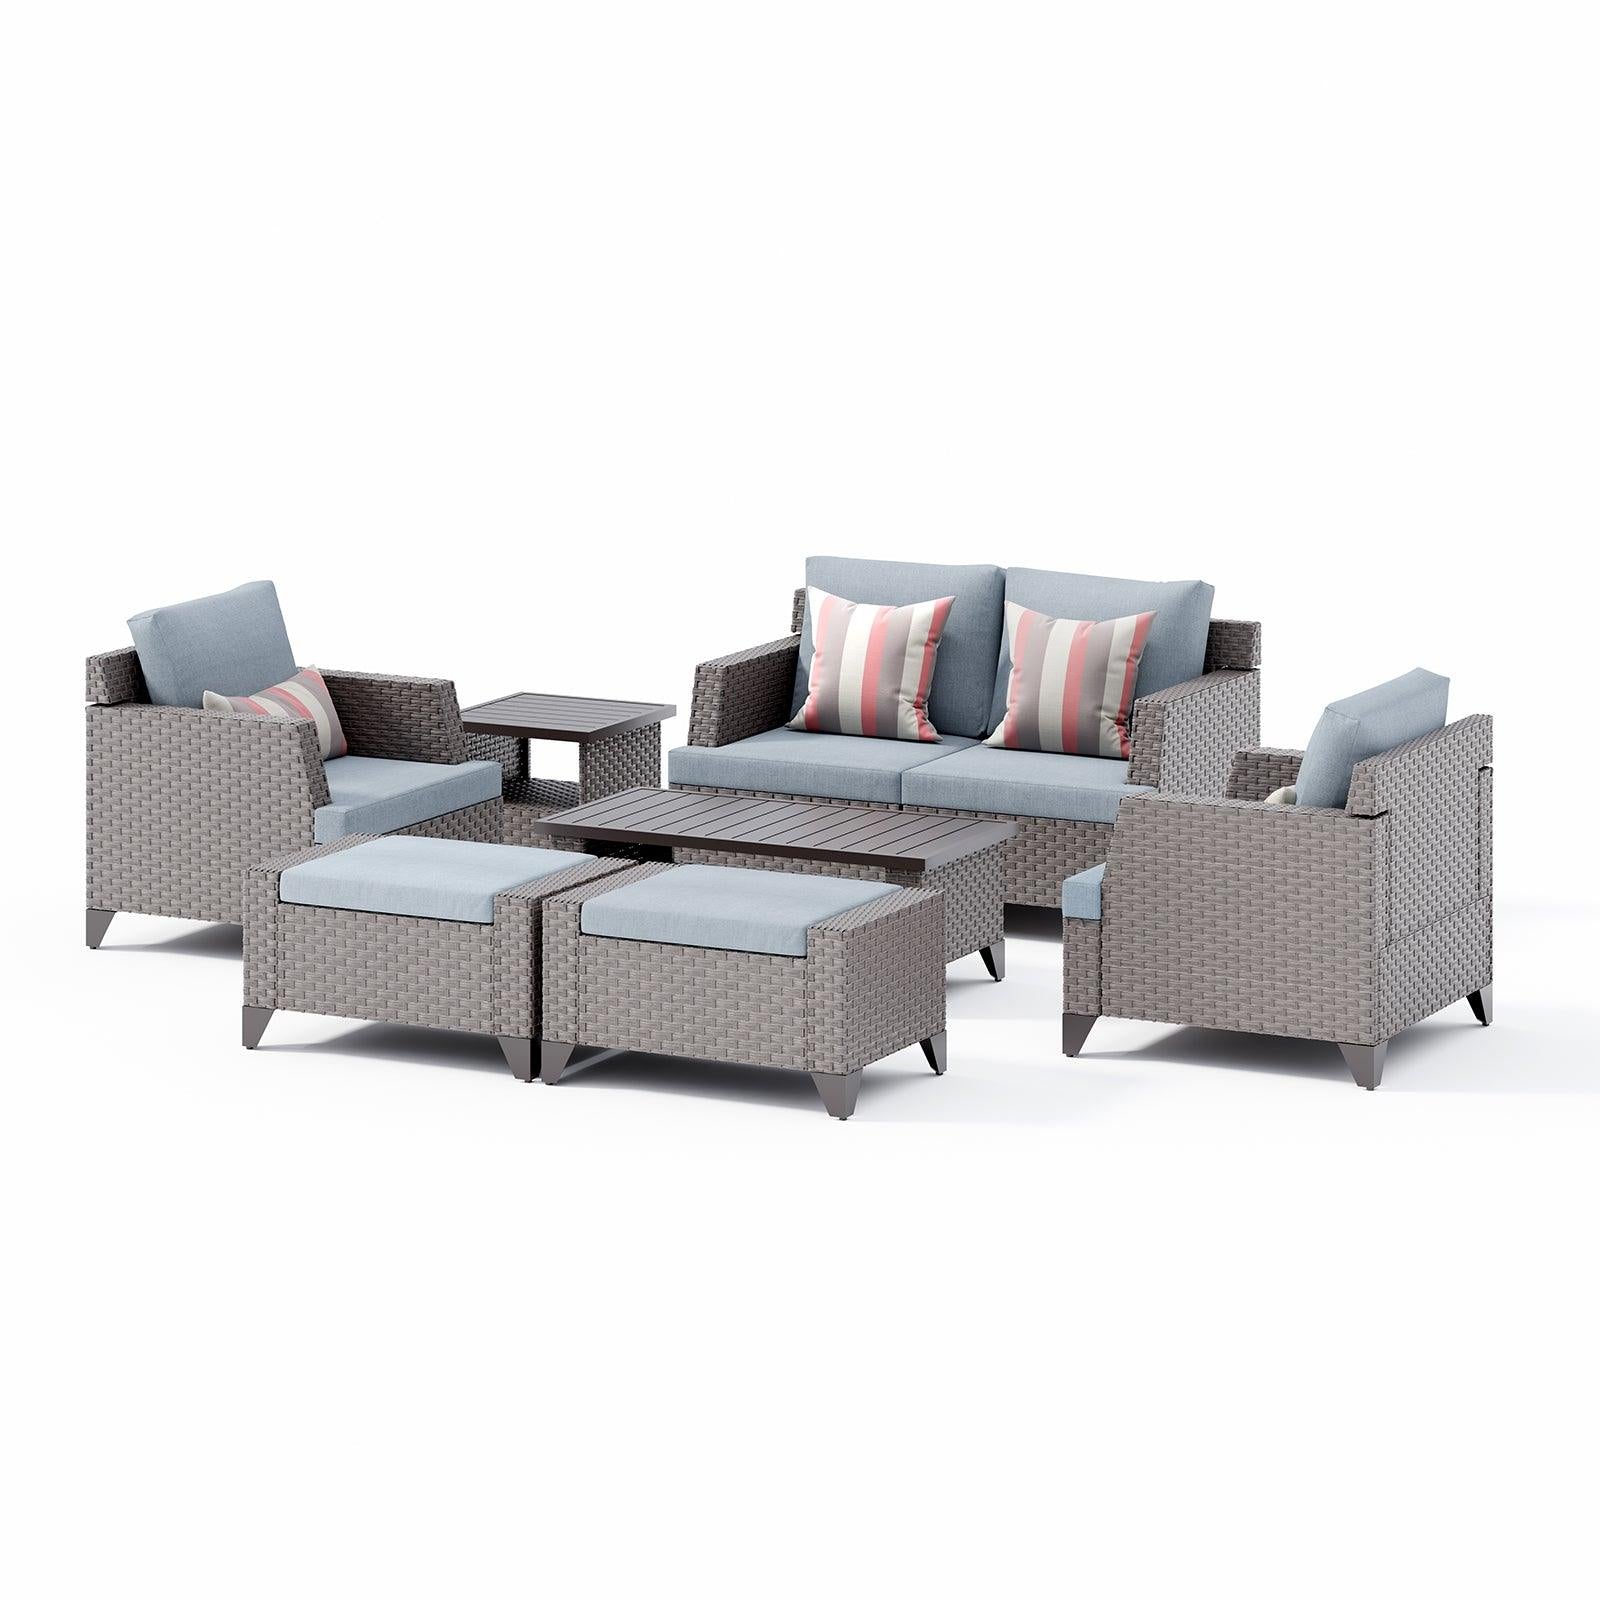 Charleston 8-pc. Outdoor Sectional Set, Taupe Rattan & Grey Cushion